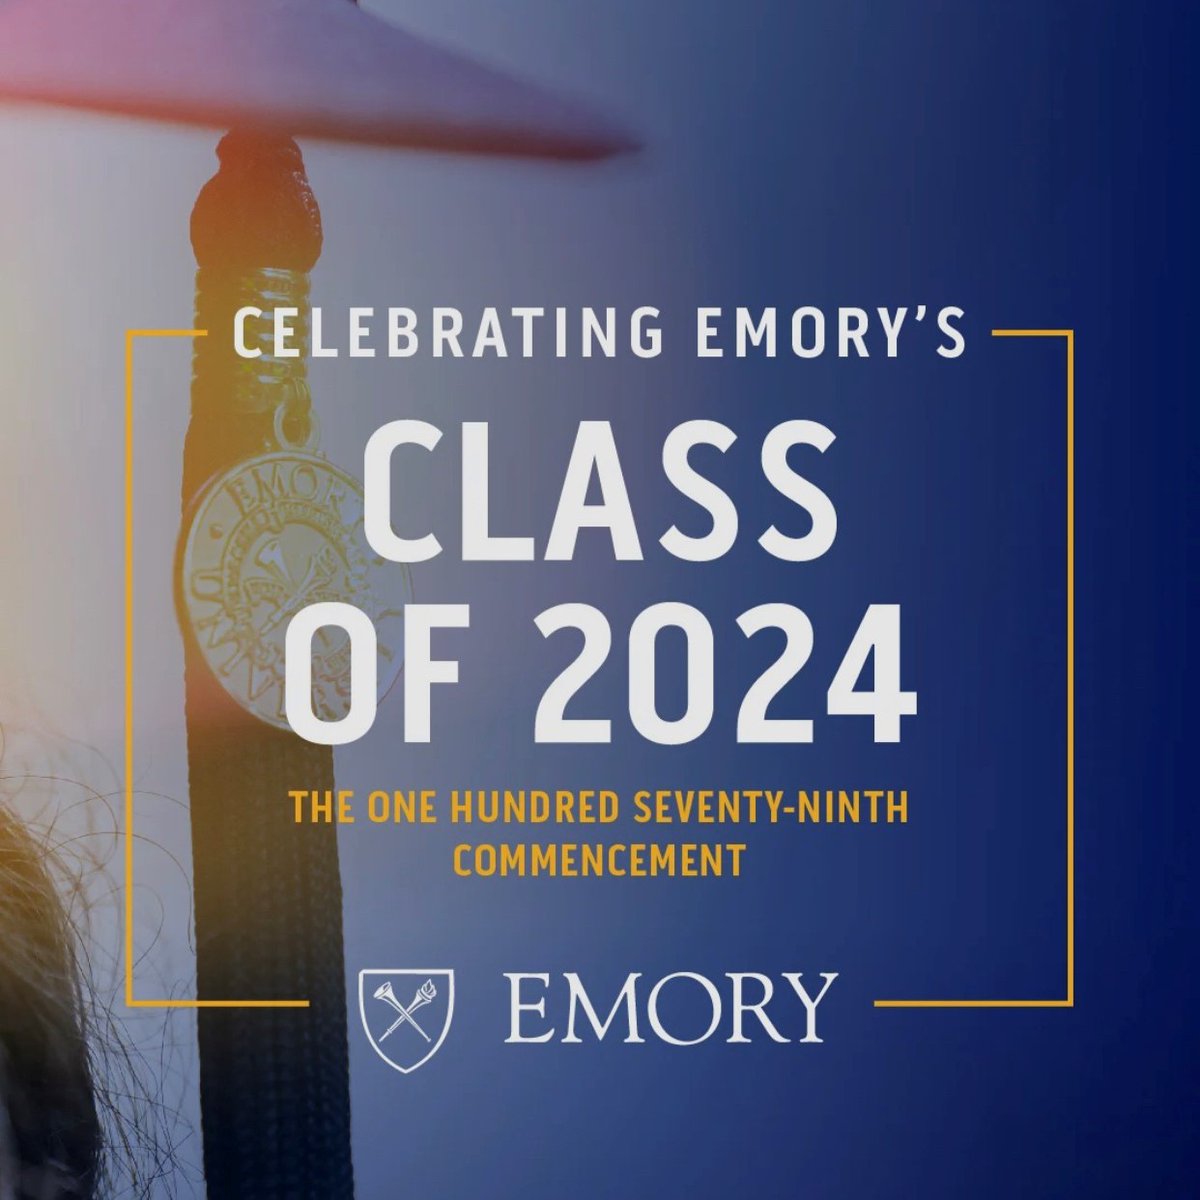 Join us in celebrating #Emory2024 by watching the Class of 2024 Commencement online, starting at 8:30 am at commencement.emory.edu/webcast/ 🎓